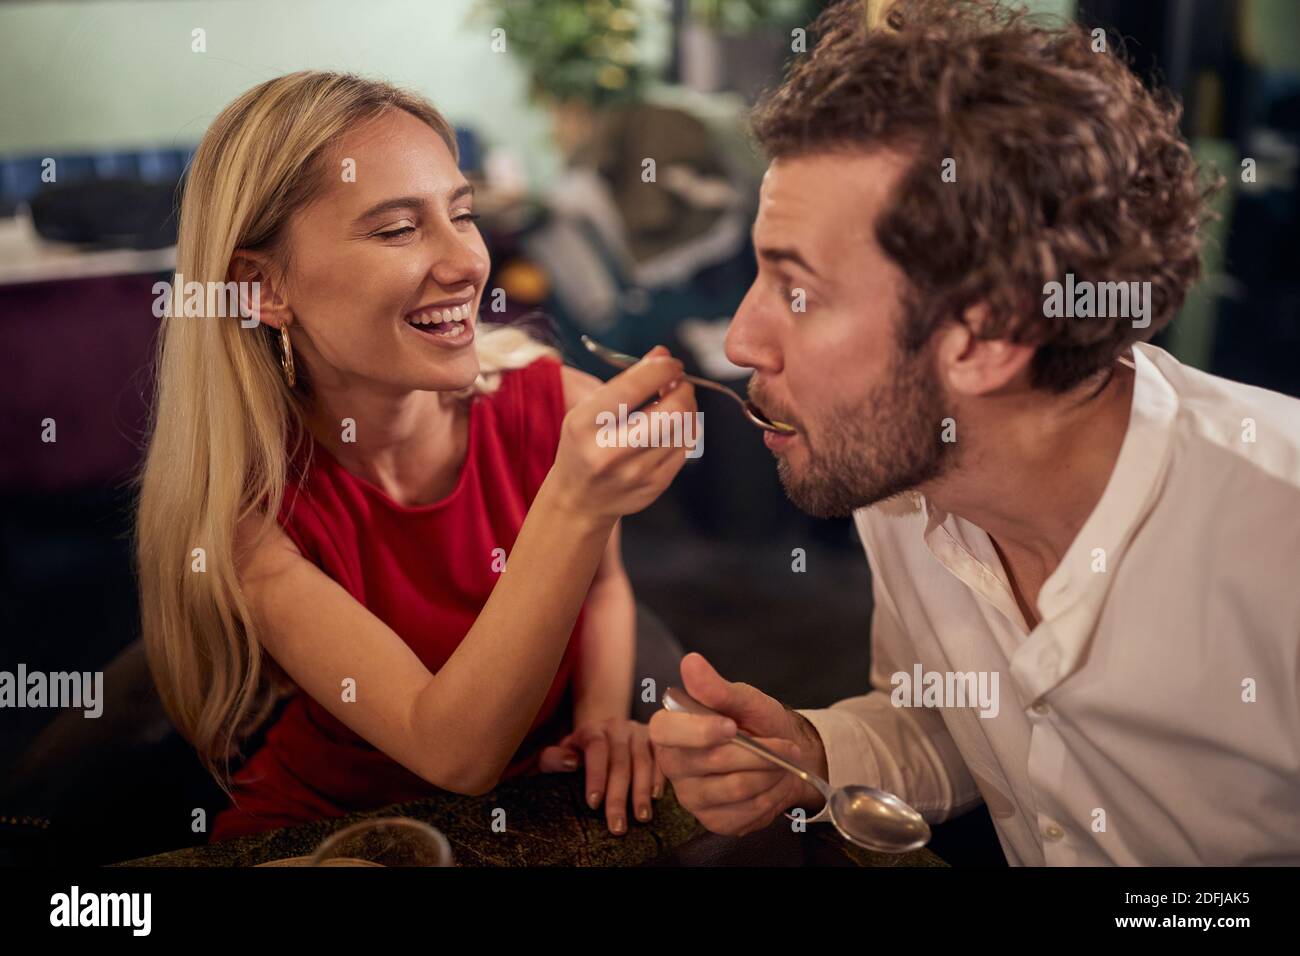 A young girl feeding his boyfriend at Valentine's day celebration at a restaurant in a relaxed atmosphere. Together, Valentine's day, celebration Stock Photo